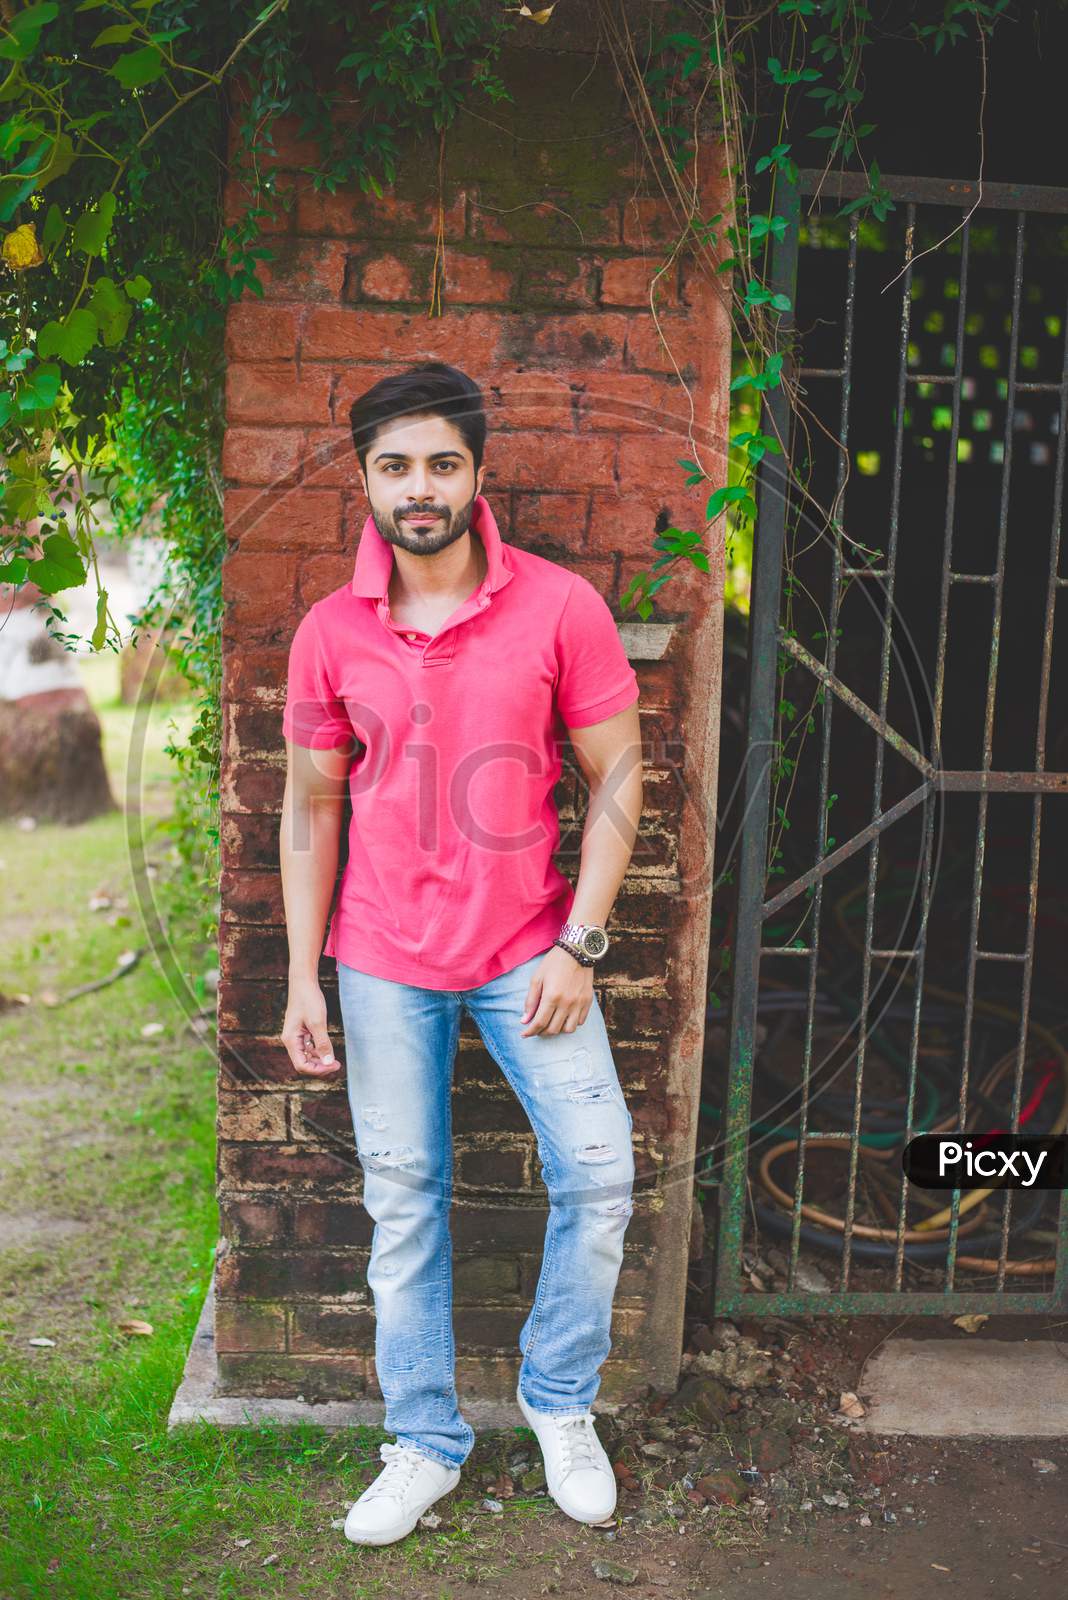 Bearded Indian young man outdoor, standing against red brick wall at garden / park